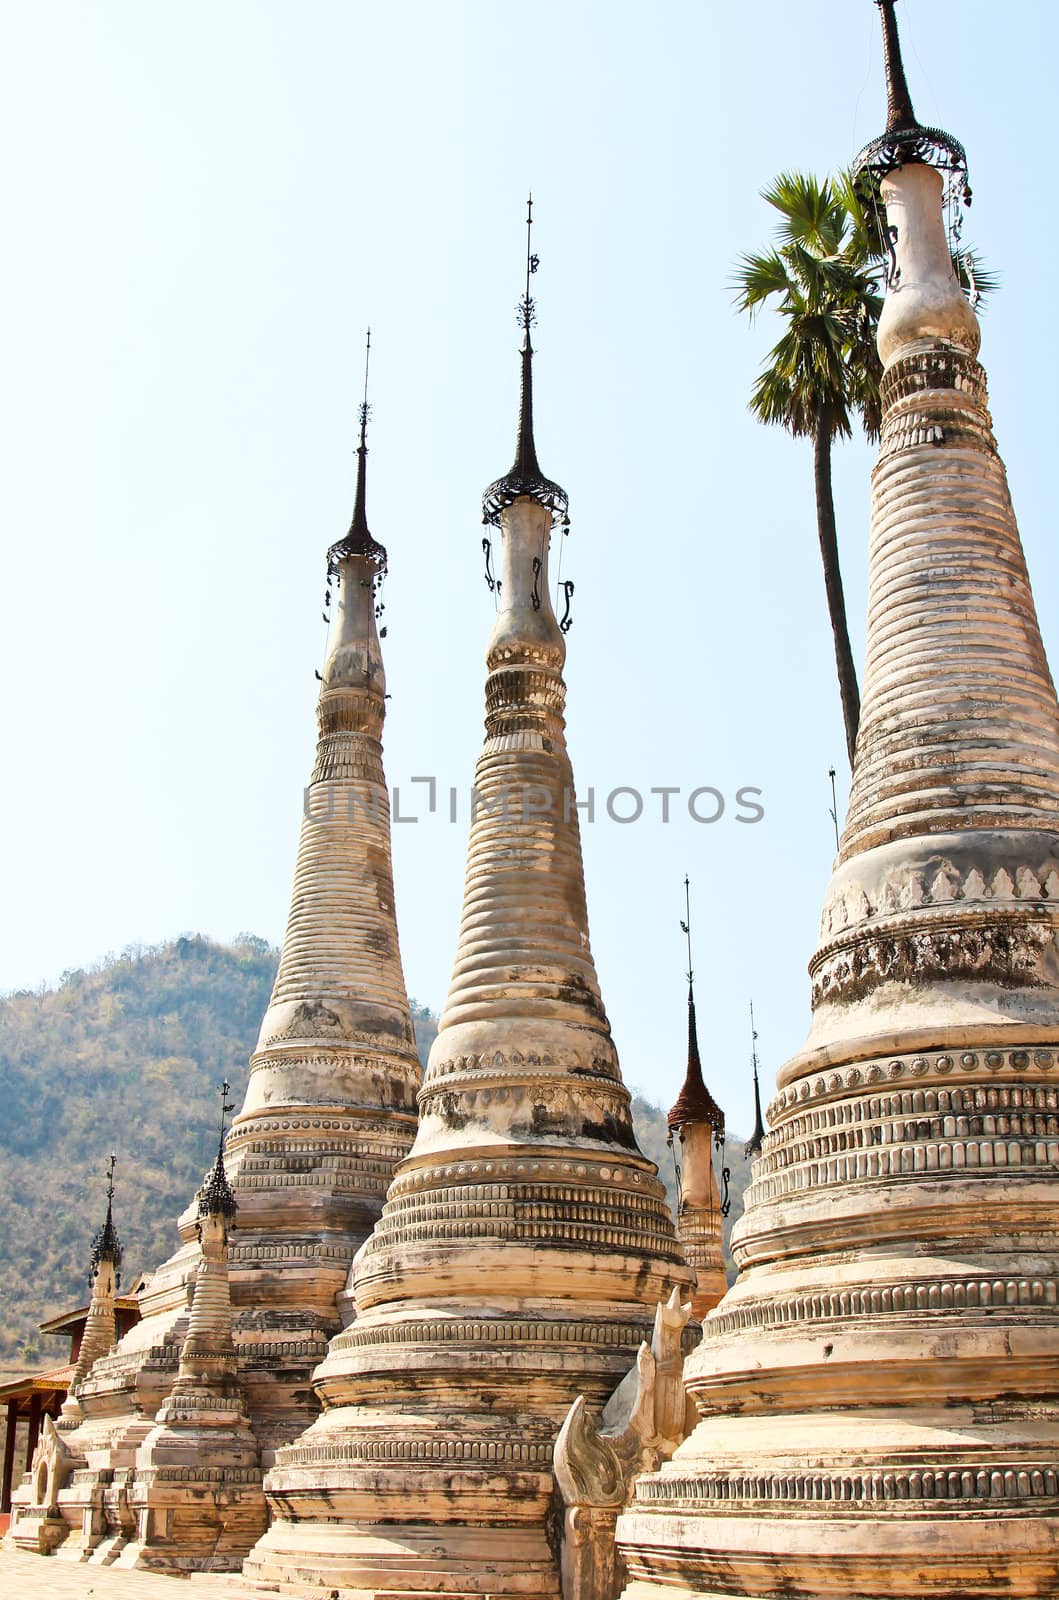 Pagoda in a Temple in Inle lake,Burma by vanillaechoes